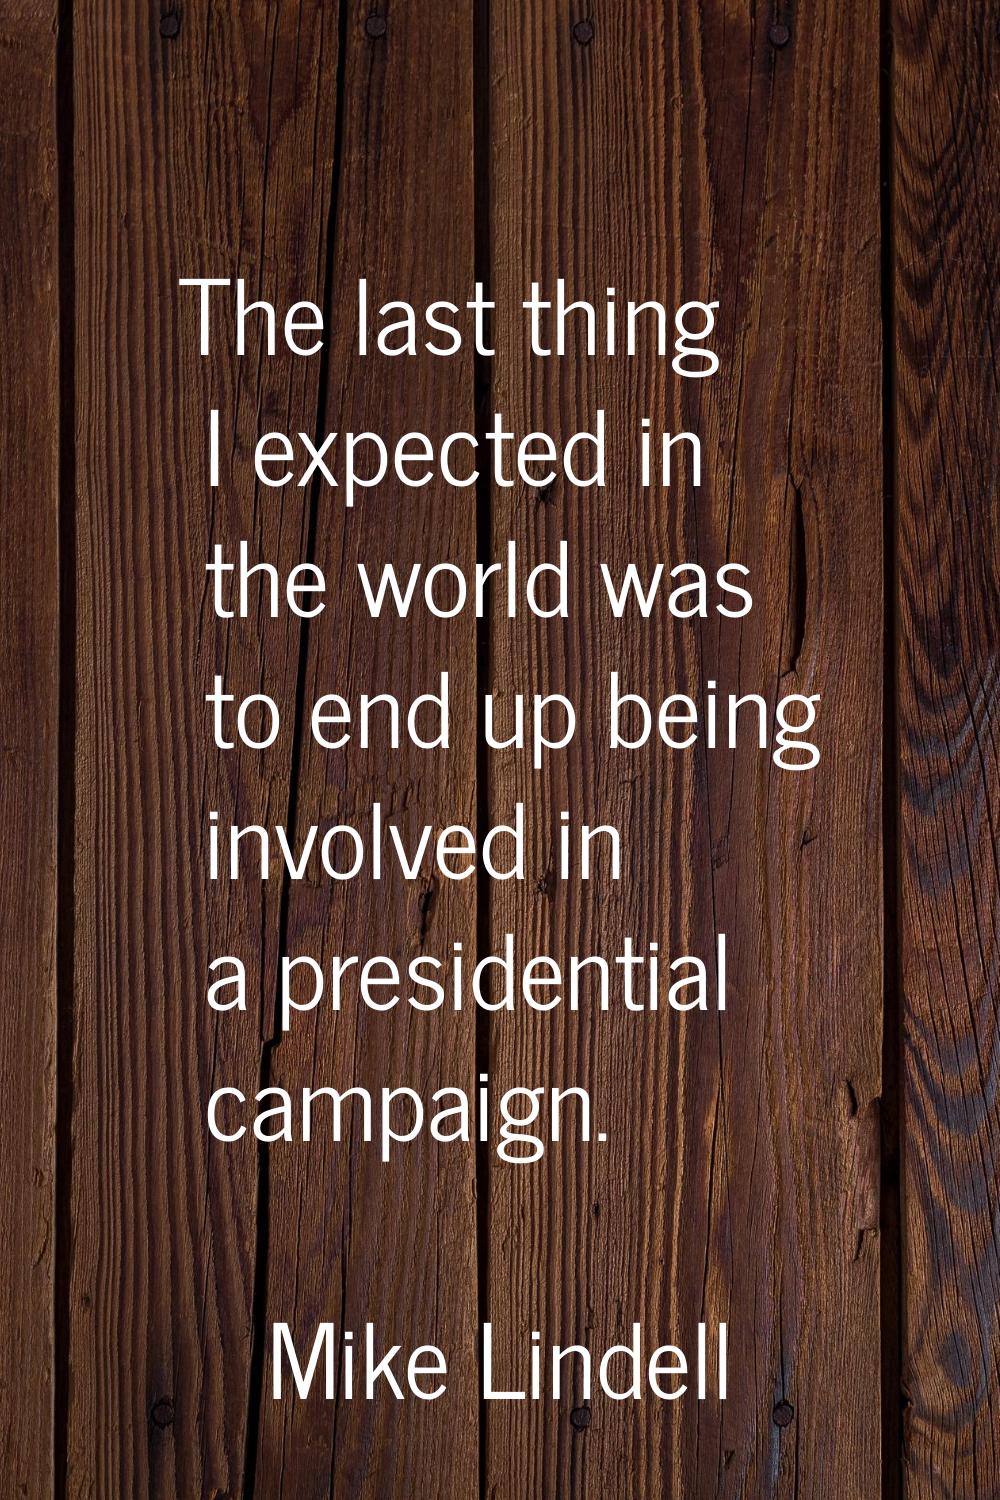 The last thing I expected in the world was to end up being involved in a presidential campaign.